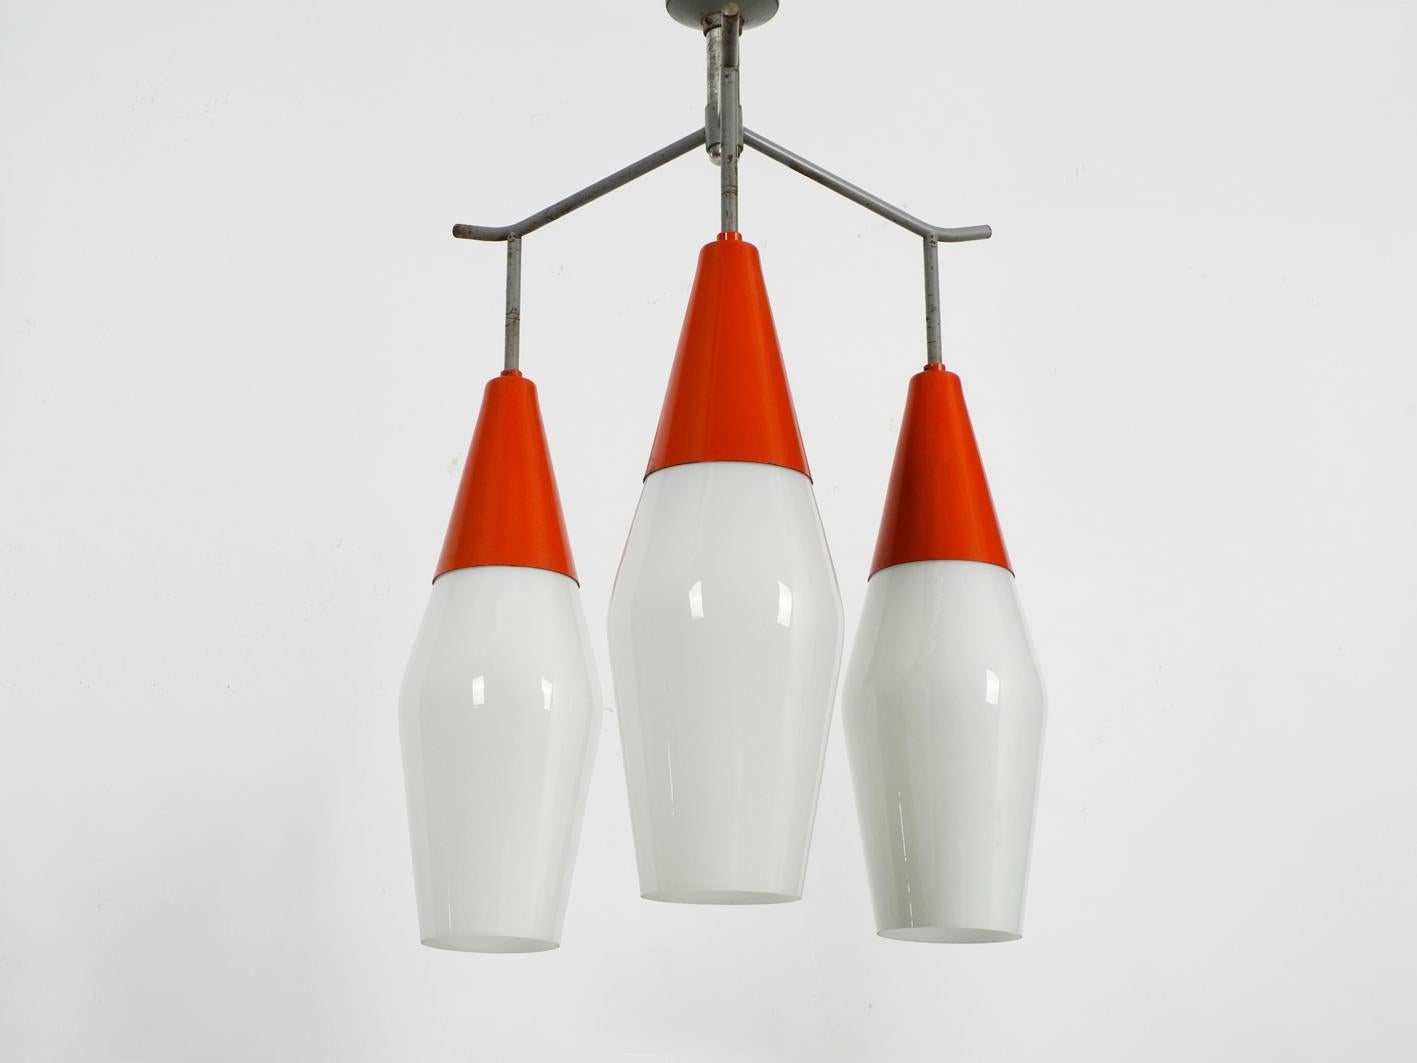 Czech Midcentury Industrial Metal and Glass Ceiling Light by Josef Hurka for Napako For Sale